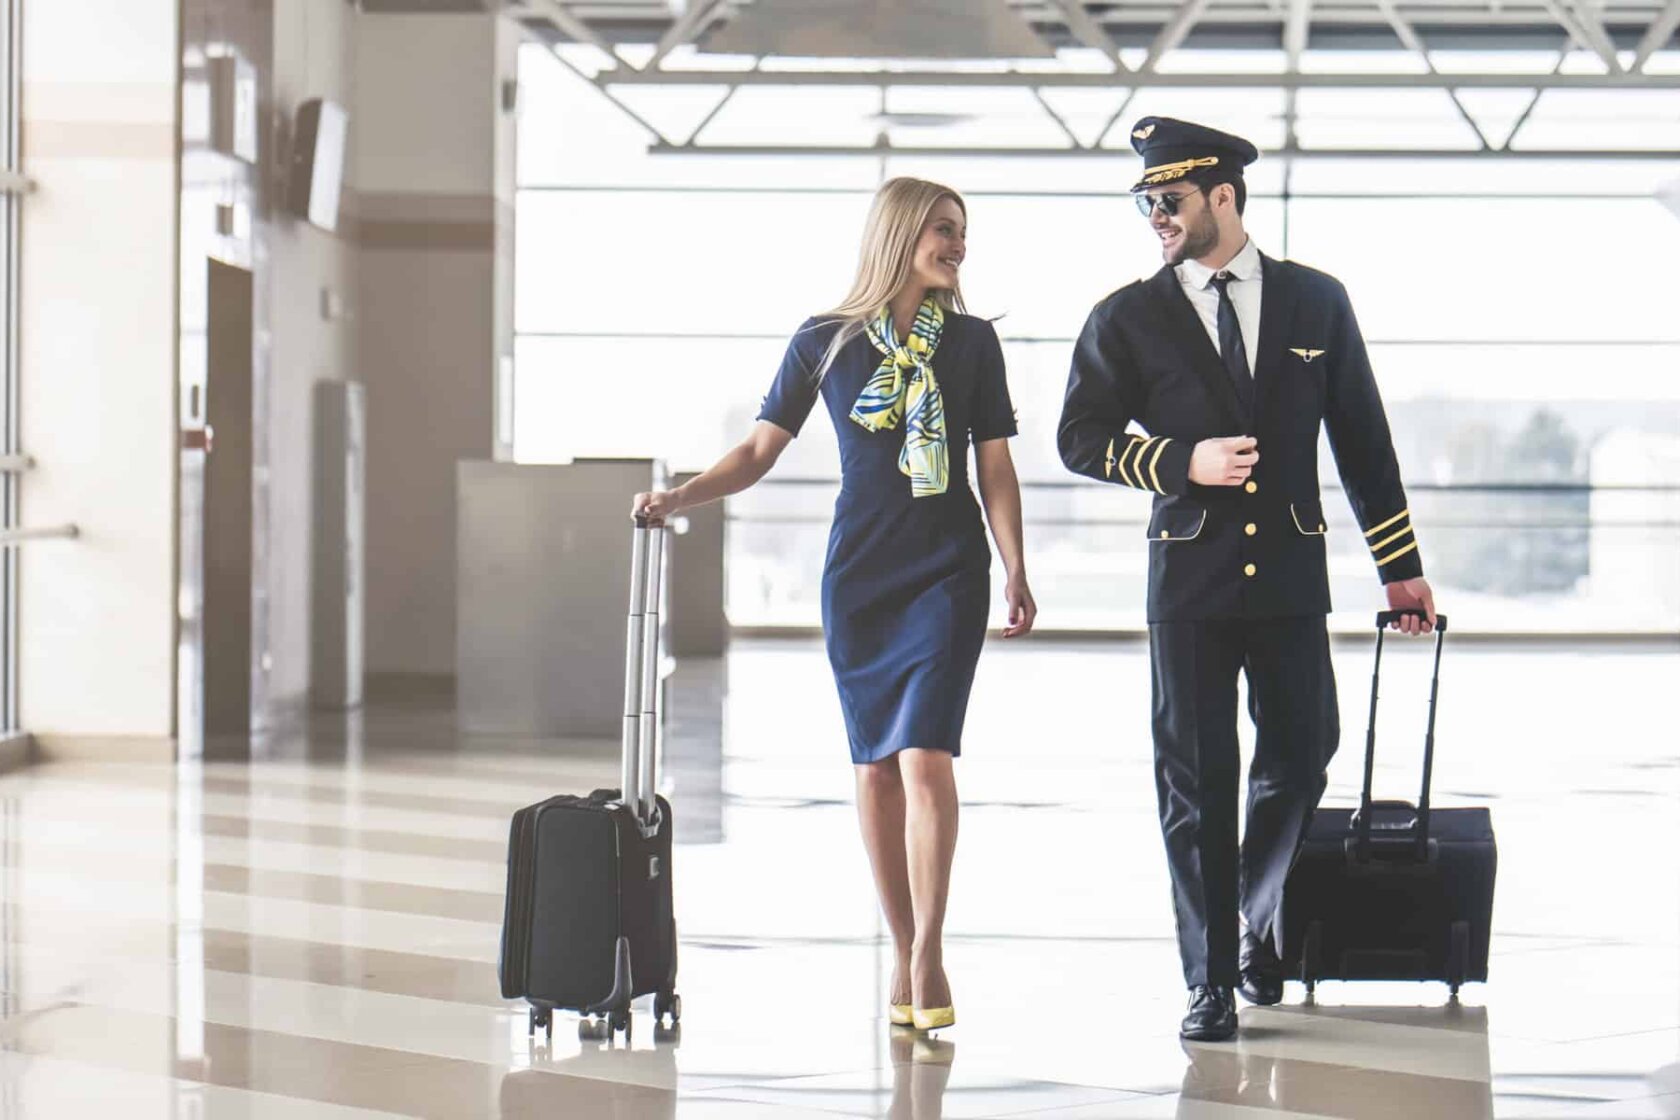 Pilot and flight attendant in airport